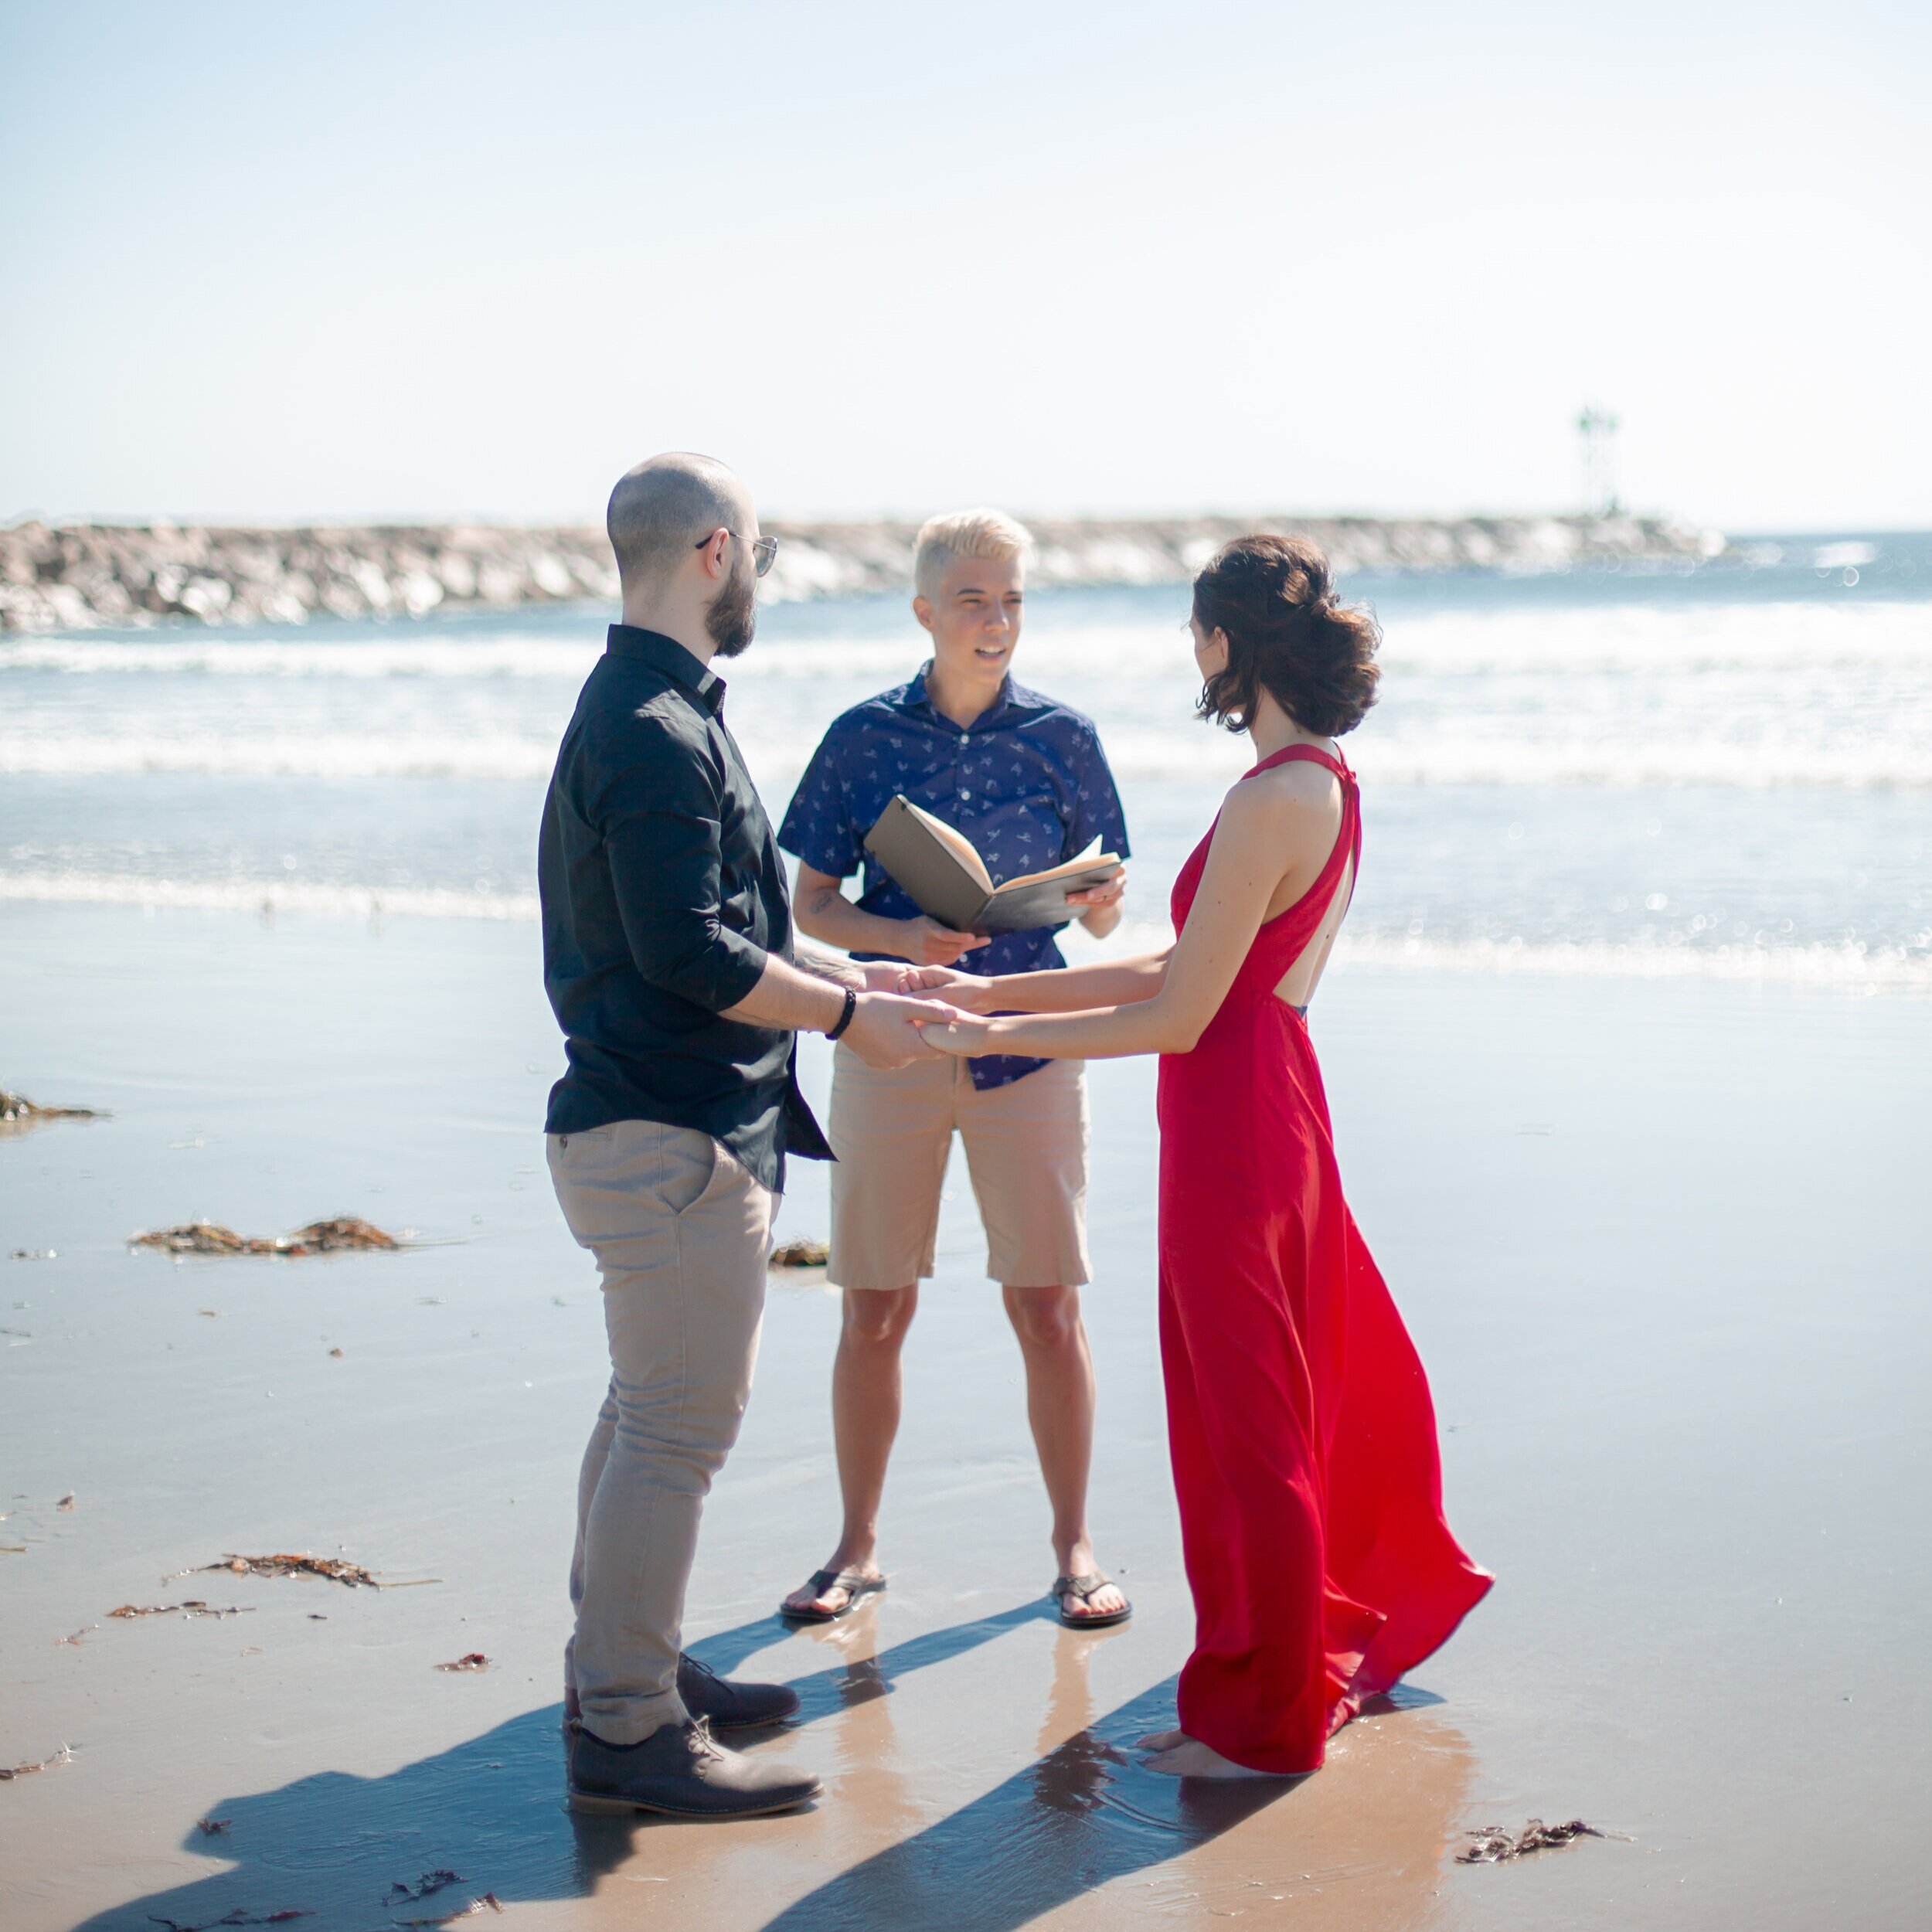 Kate-Alison-Photography-Wells-Beach-Maine-Elopement-The-Chill-Officiant-11.jpg